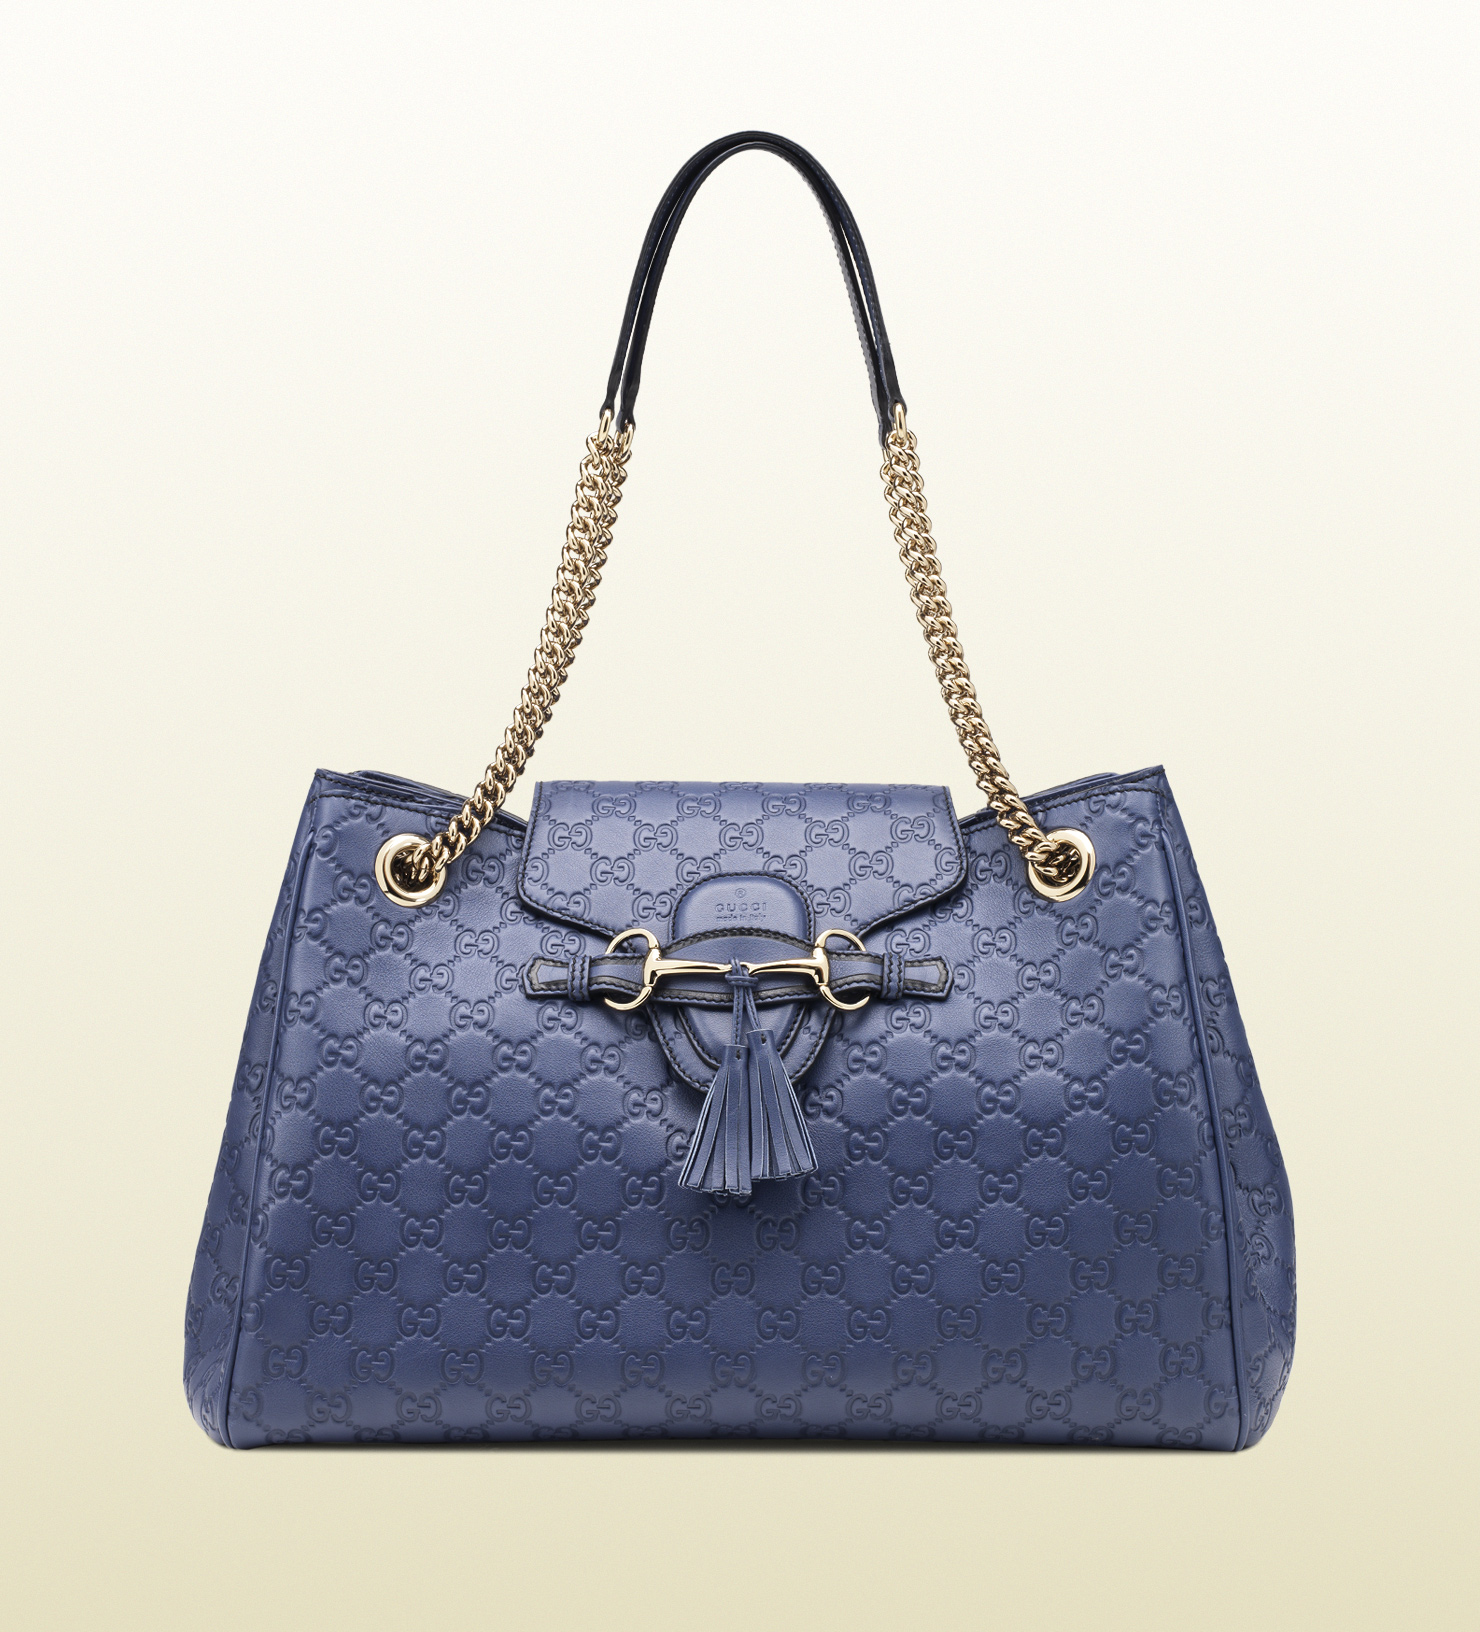 Lyst - Gucci Emily Ssima Leather Shoulder Bag in Blue